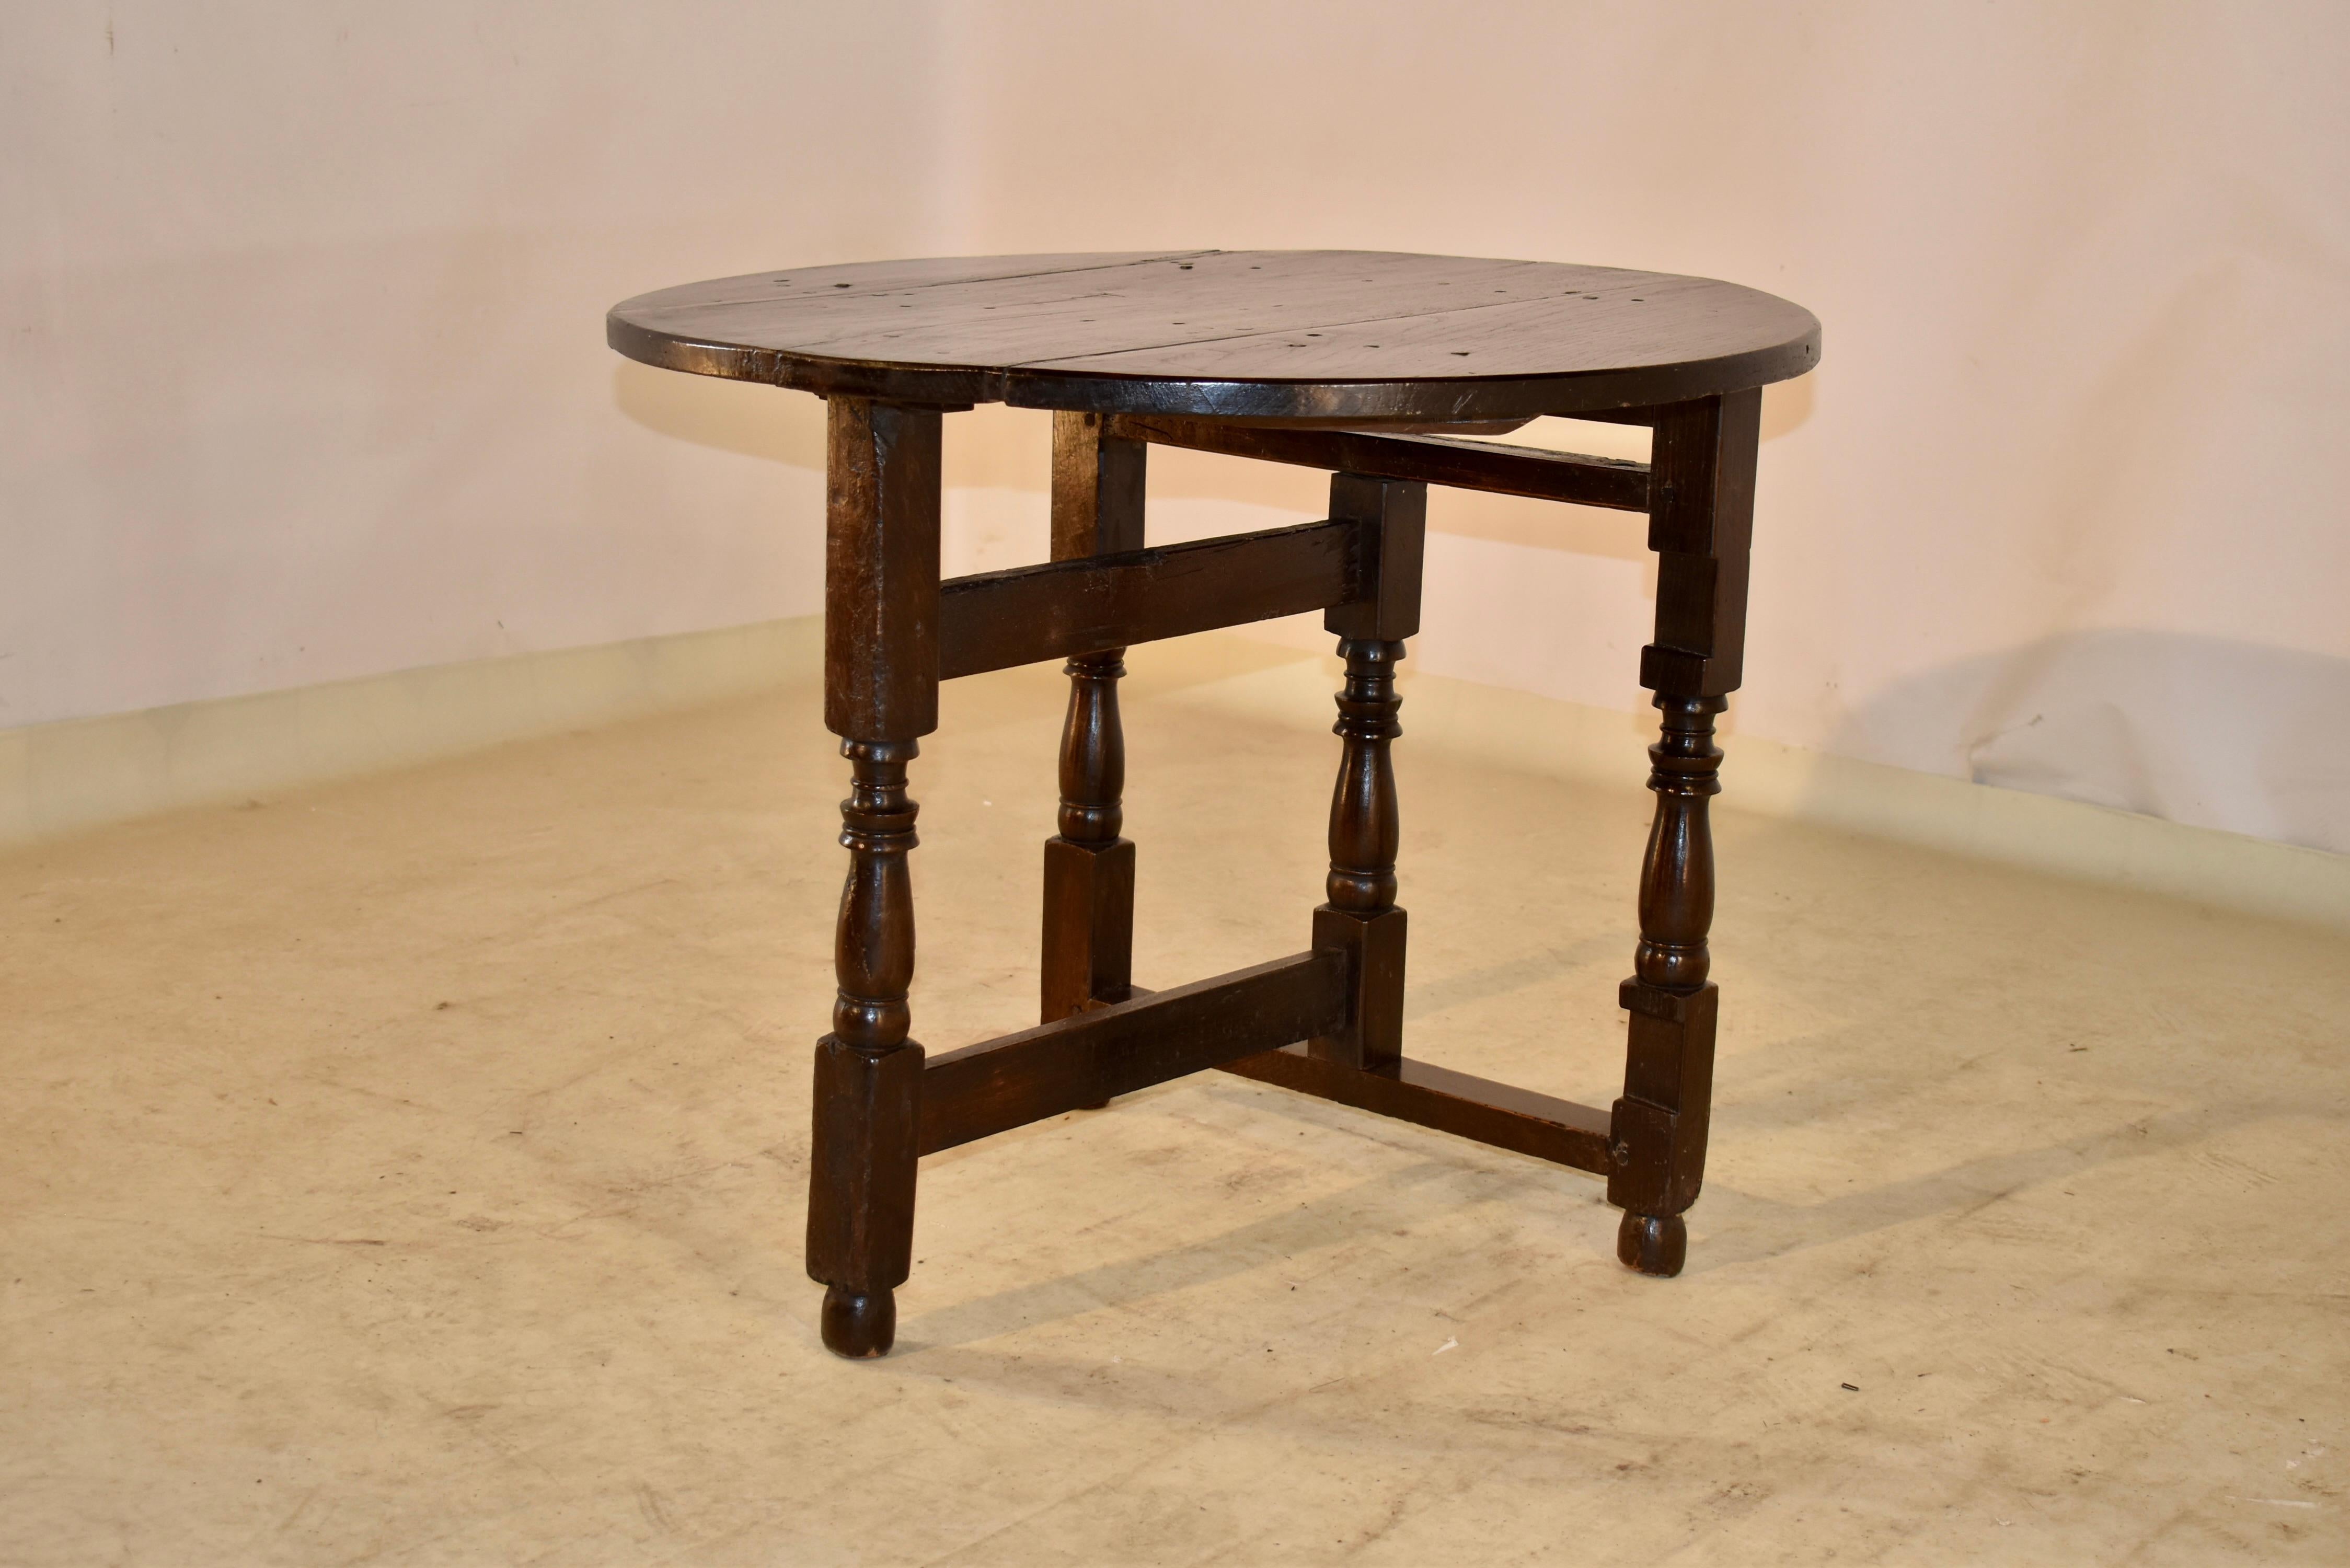 Charles II 17th Century Folding Carriage Table